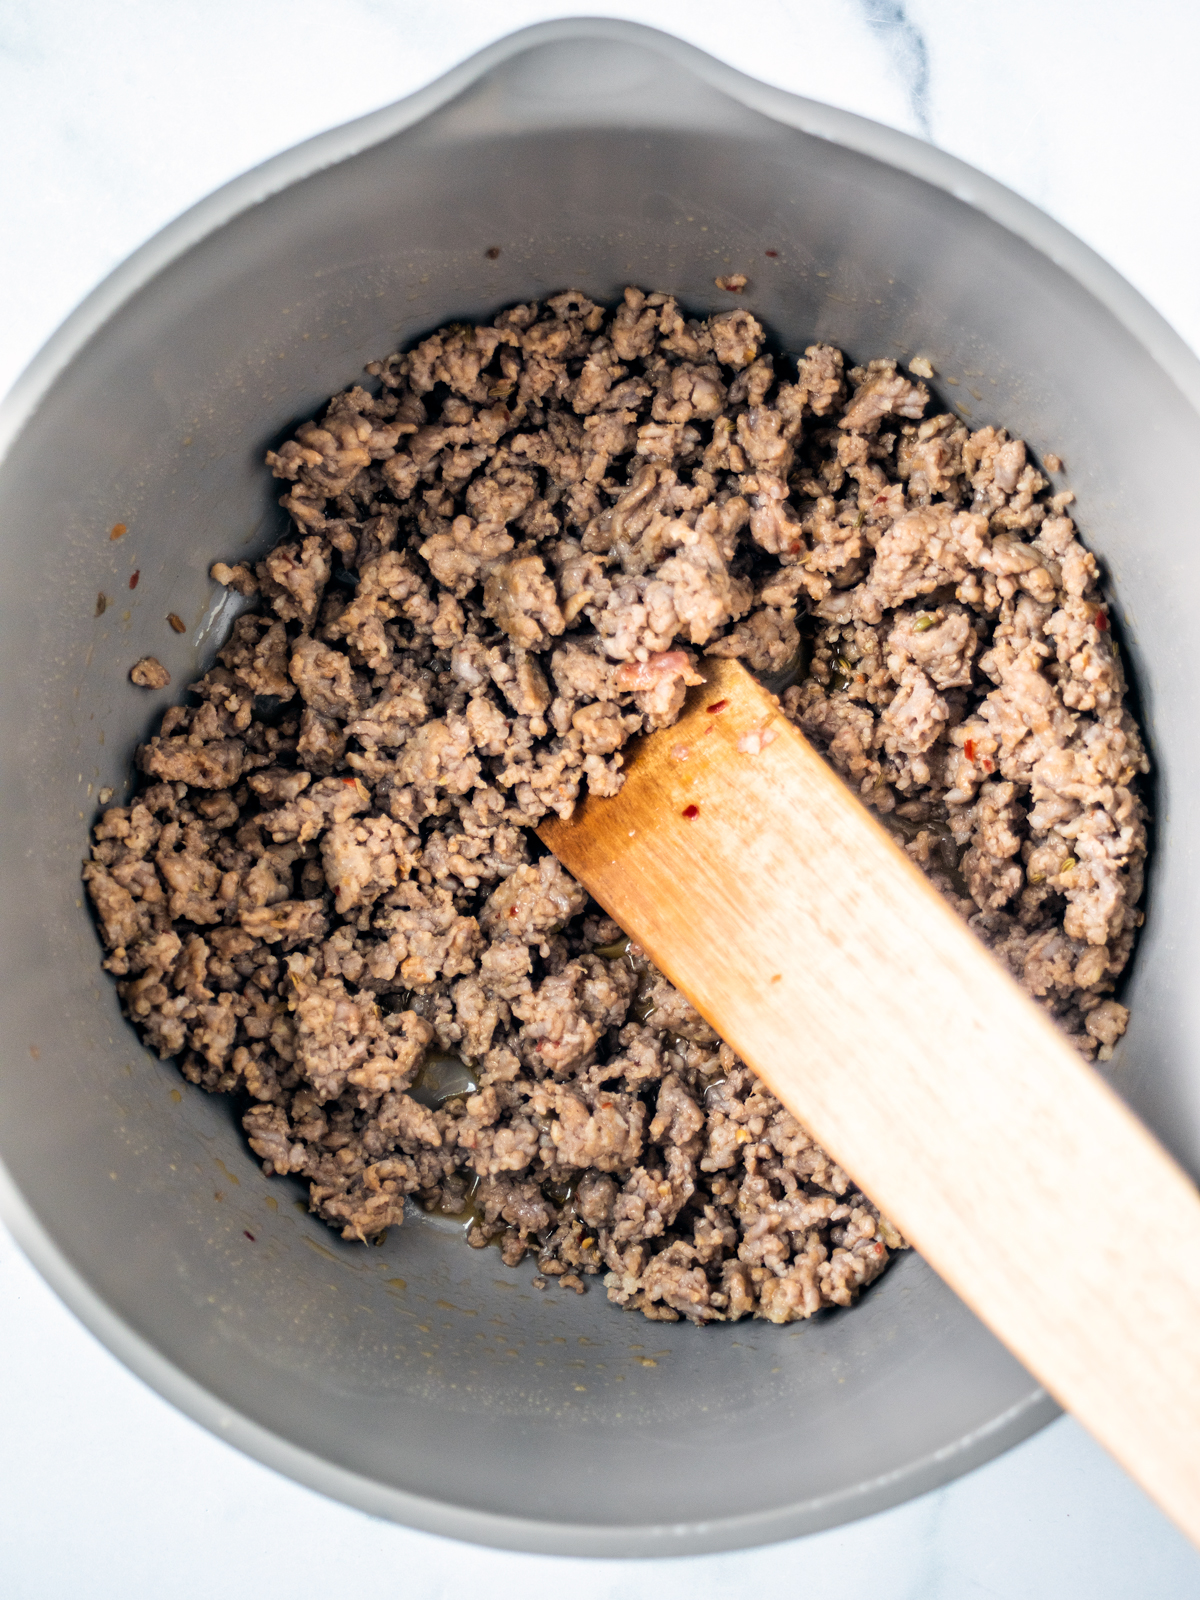 Pot of cooked ground sausage.